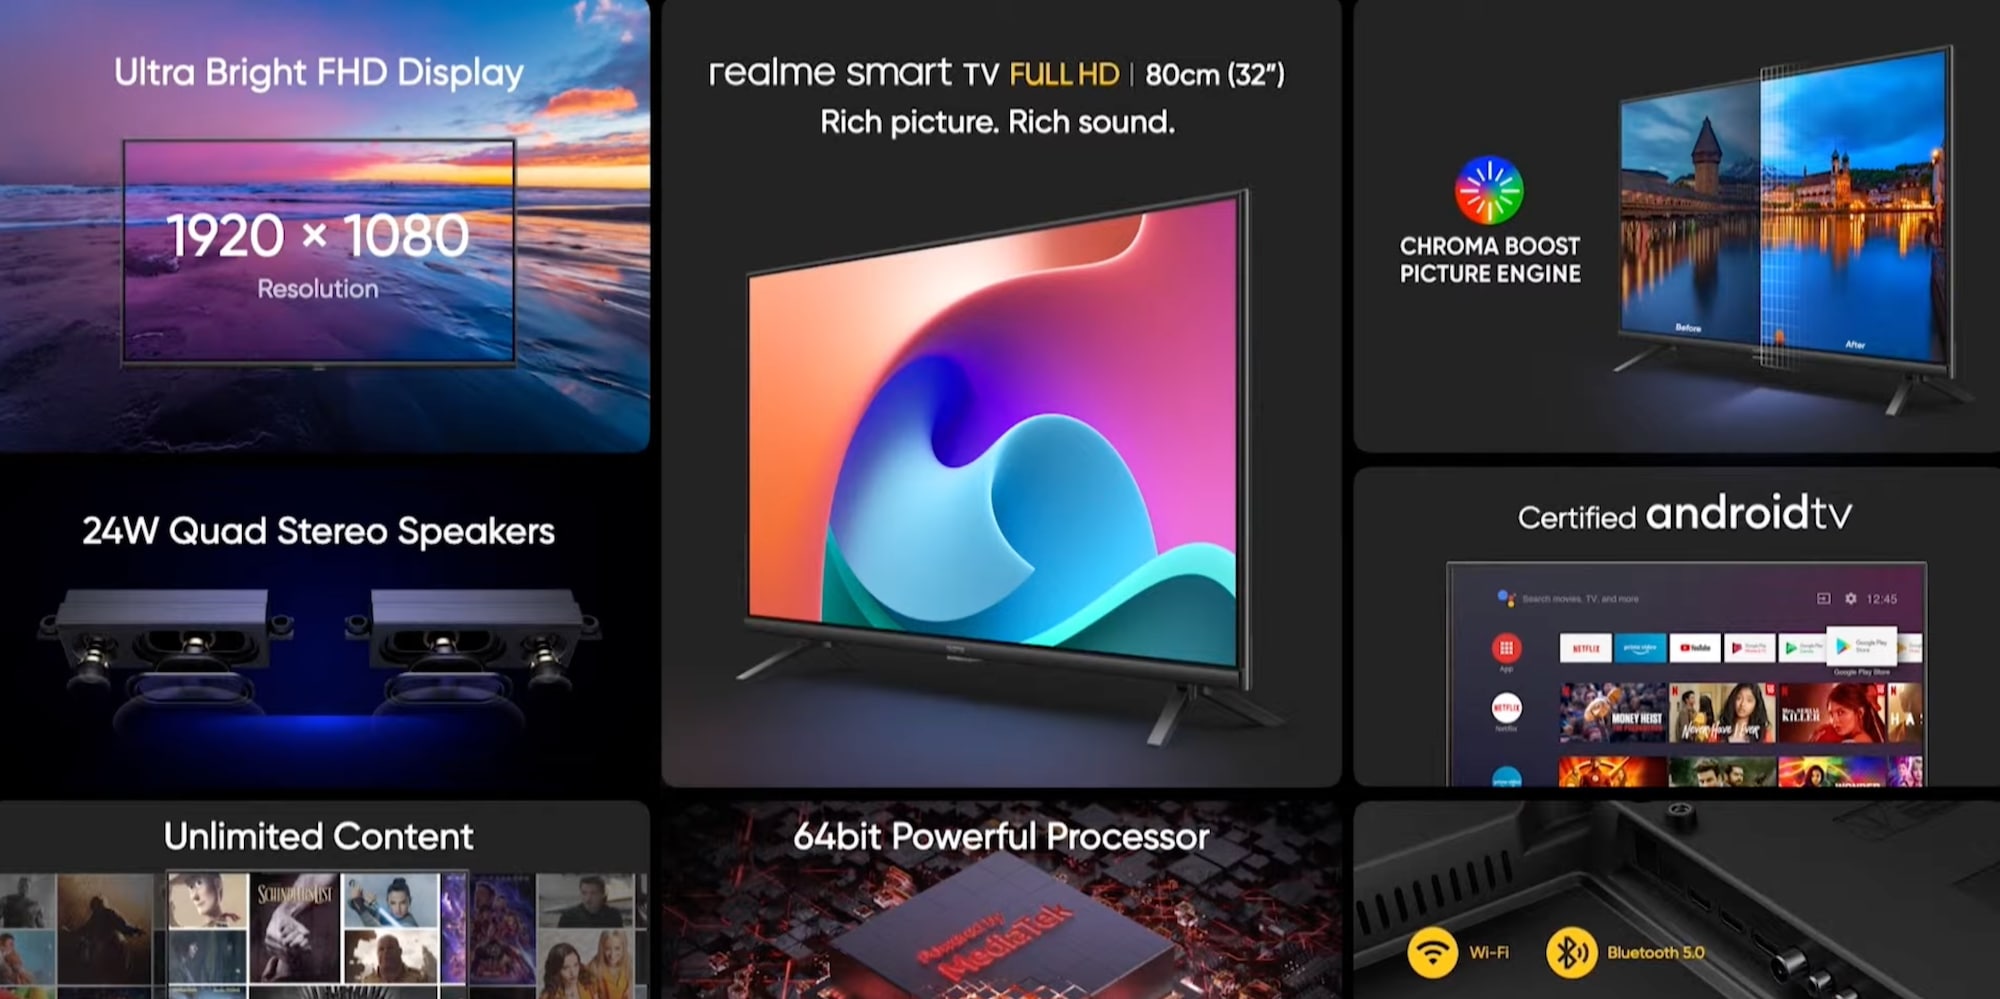 Realme TV FHD specifications and features